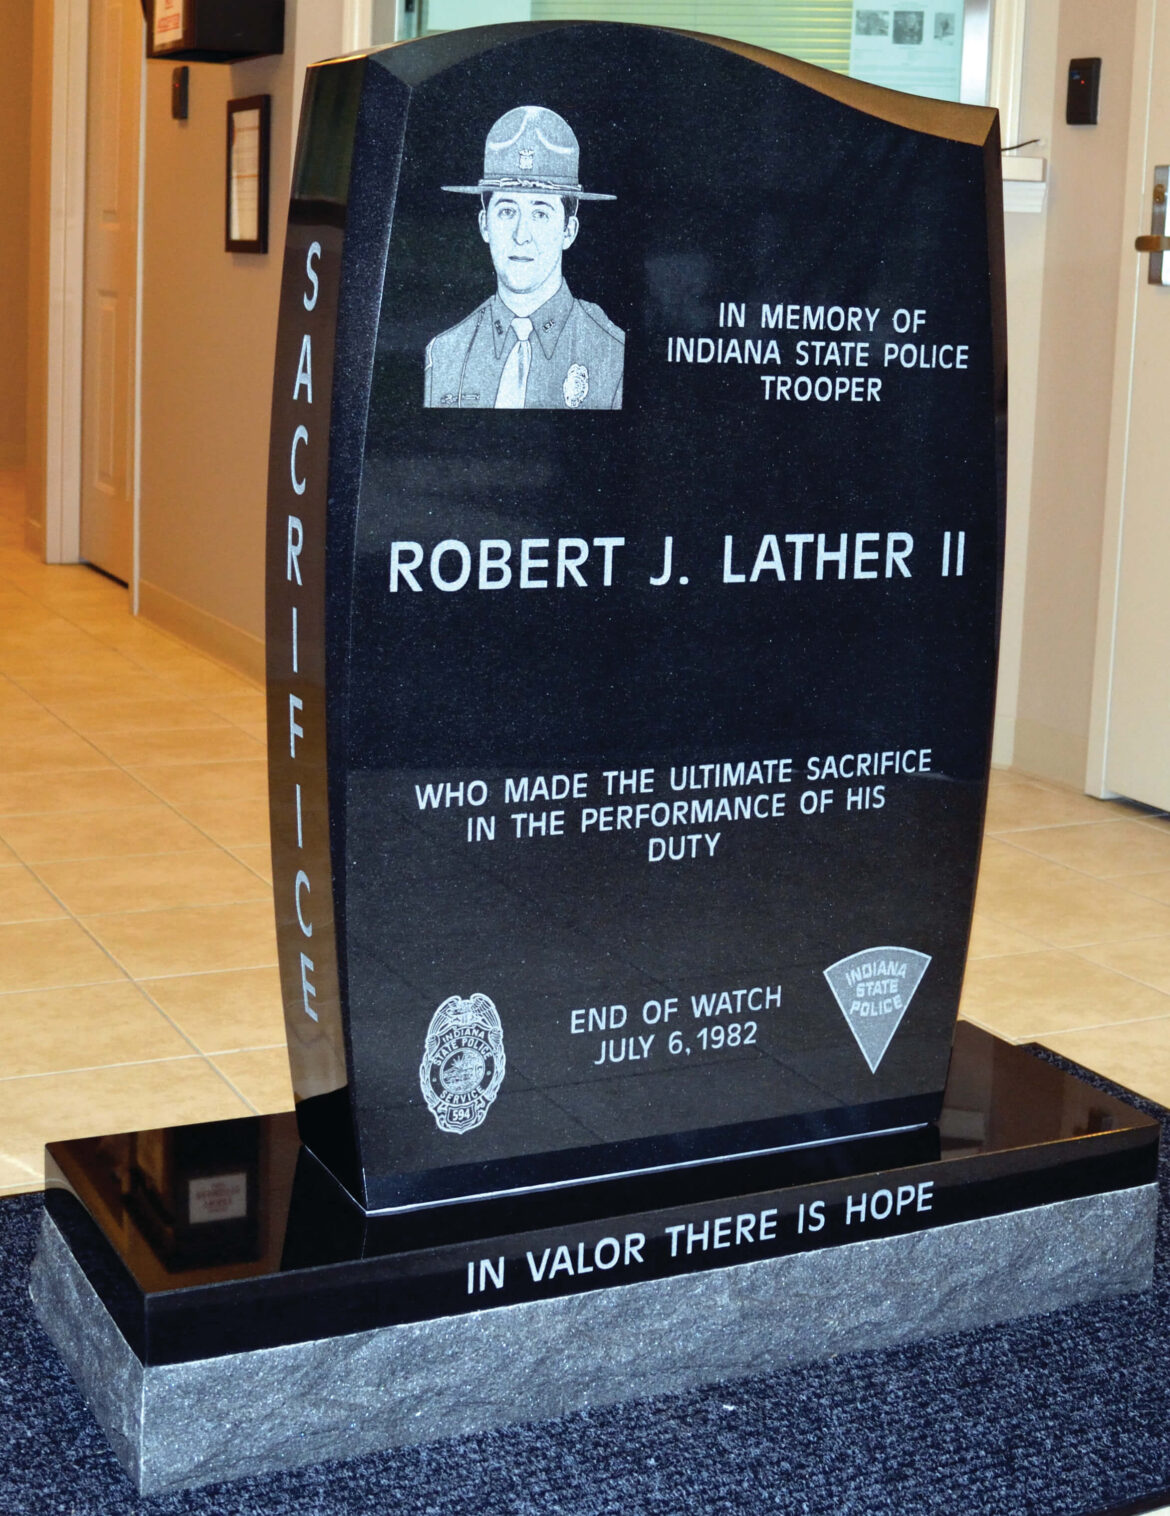 Monumental day: Fallen trooper memorialized, widow later became first APD director